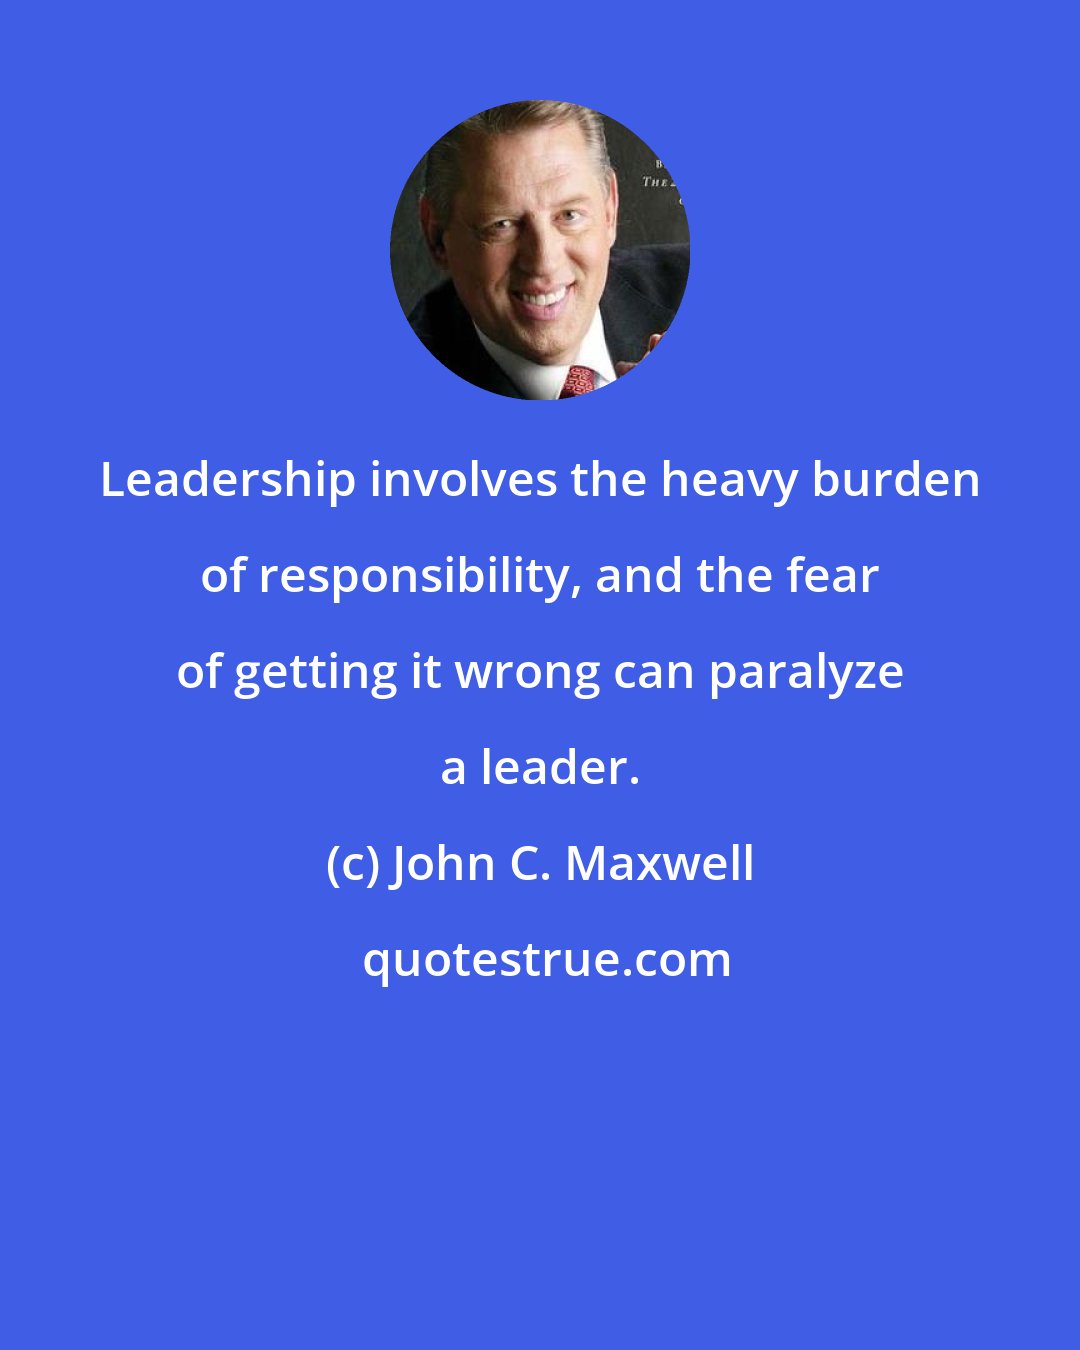 John C. Maxwell: Leadership involves the heavy burden of responsibility, and the fear of getting it wrong can paralyze a leader.